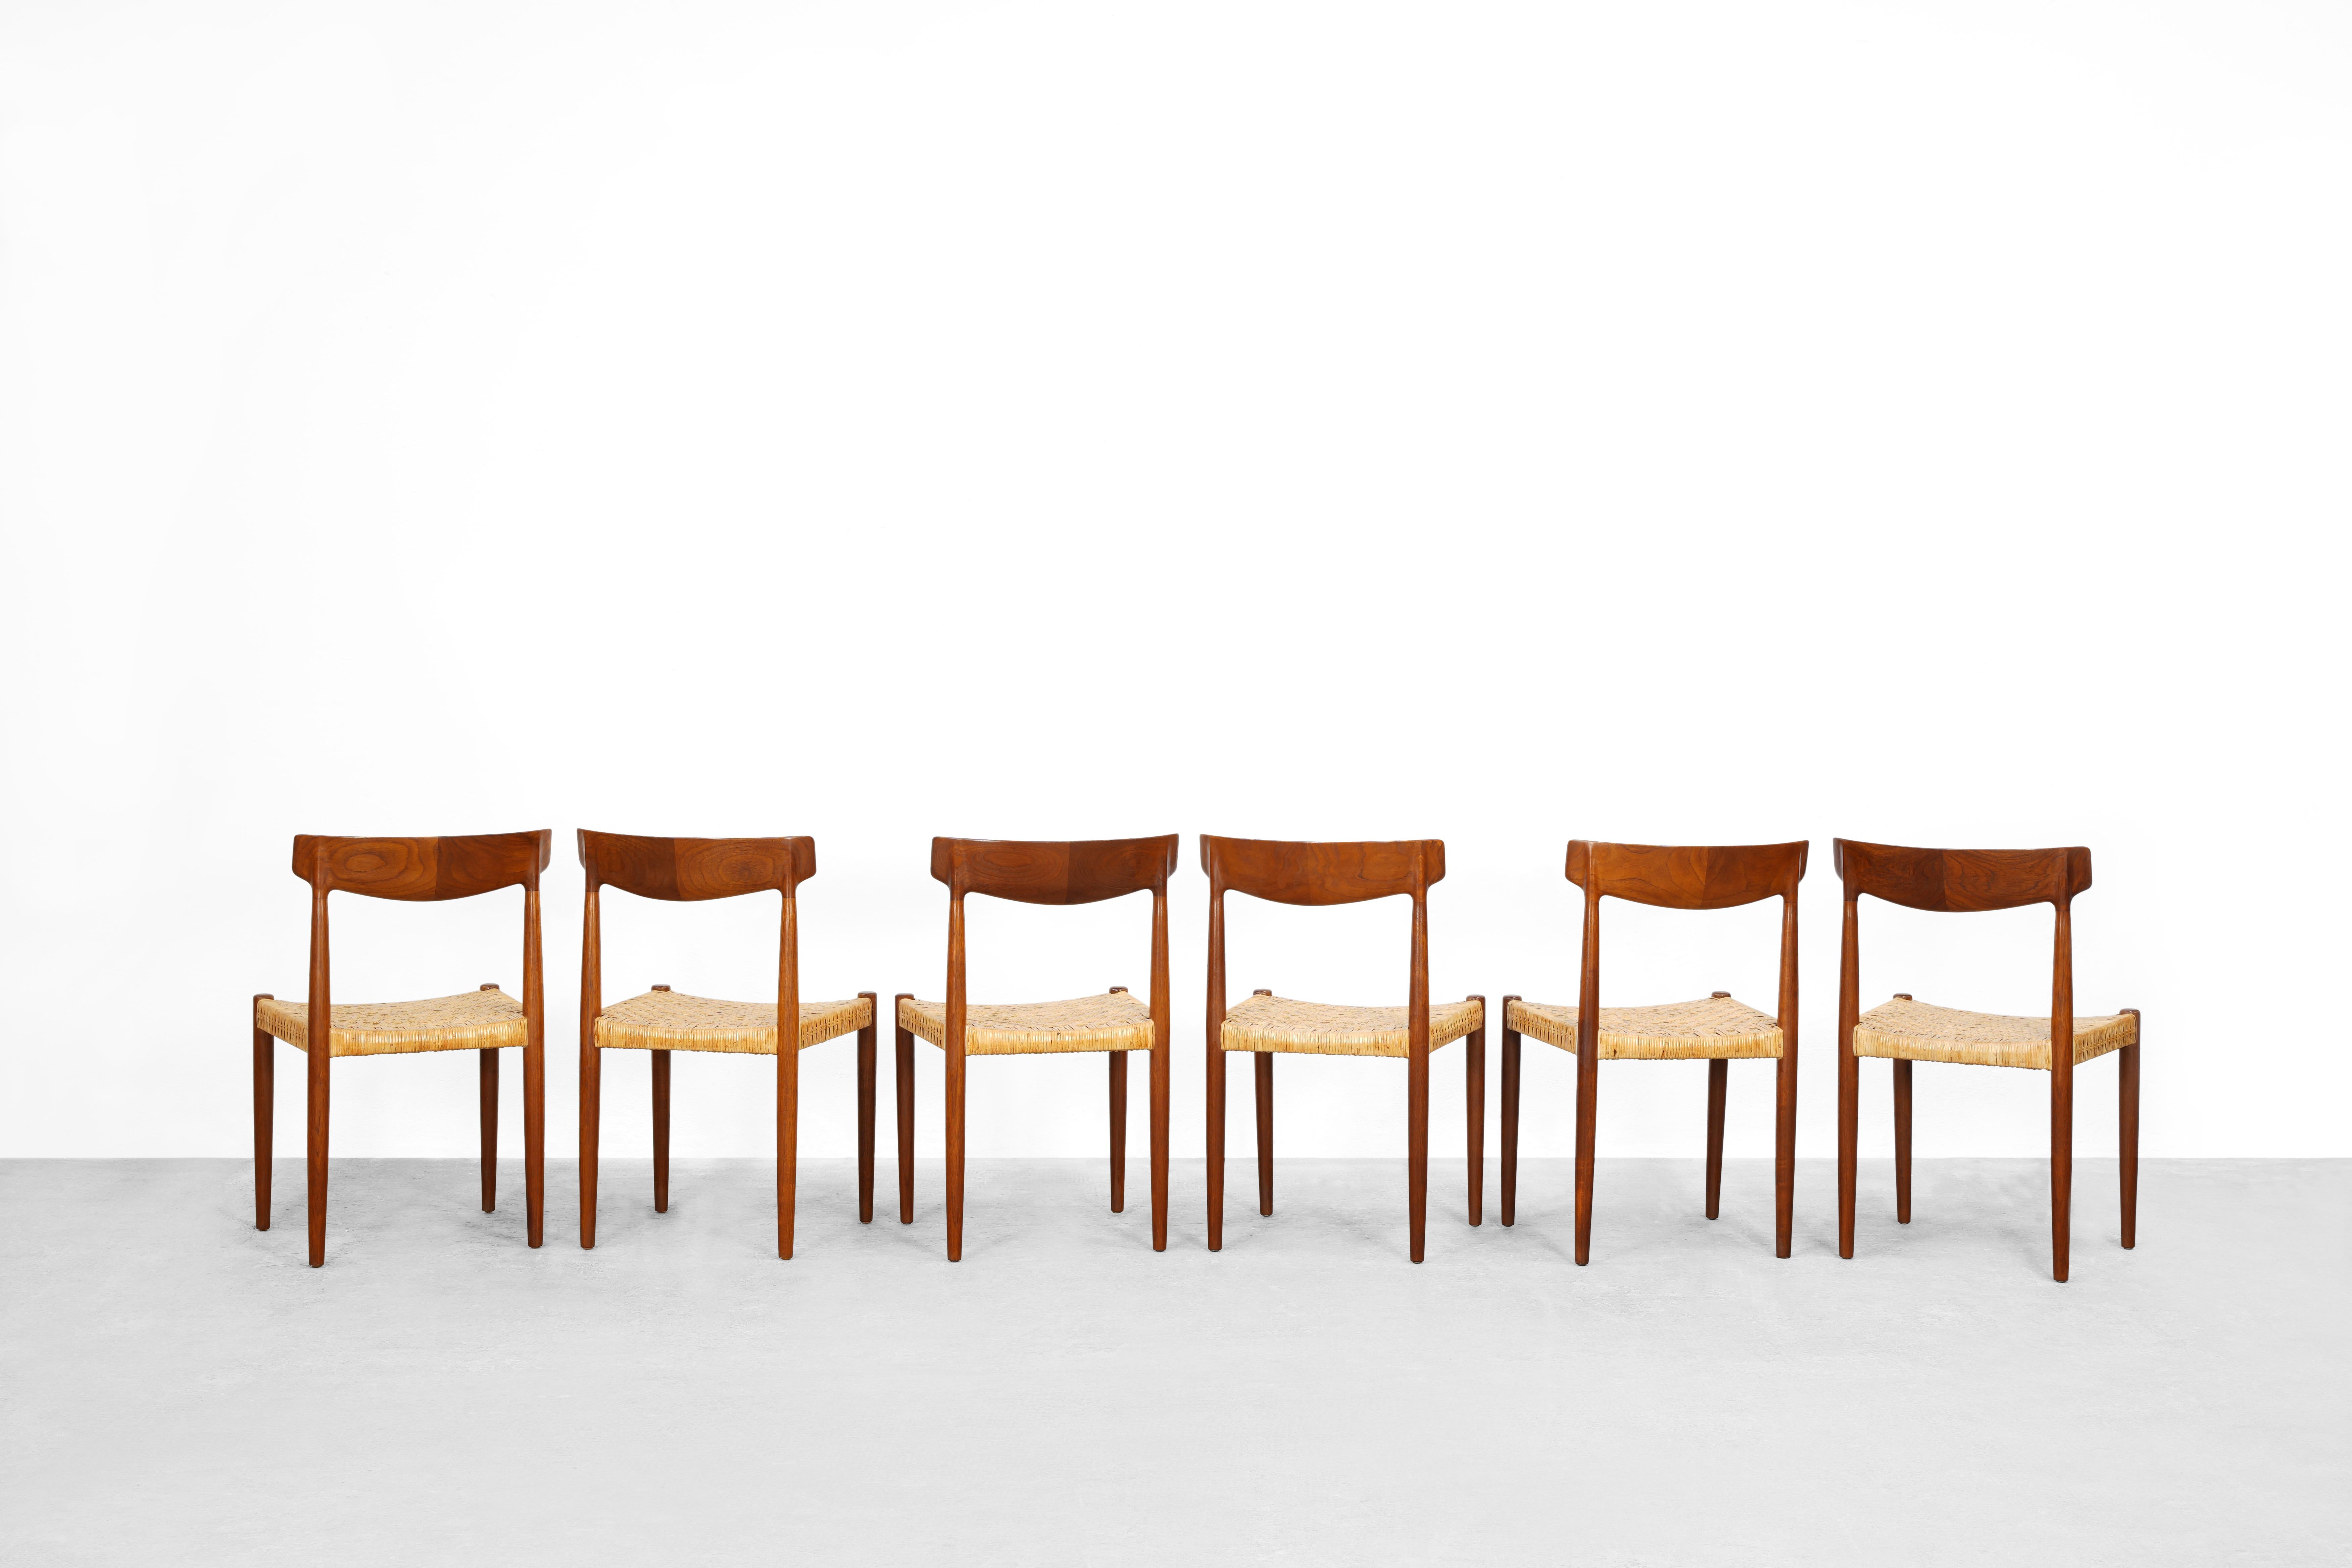 Rare set of six dining chairs model 343 designed by Knud Færch and produced by Slagelse Møbelvaerk in Denmark in the 1960ies. 
All chairs are made out of solid teak and are covered with a cane mesh. Very rare version with the cane mesh!
All six